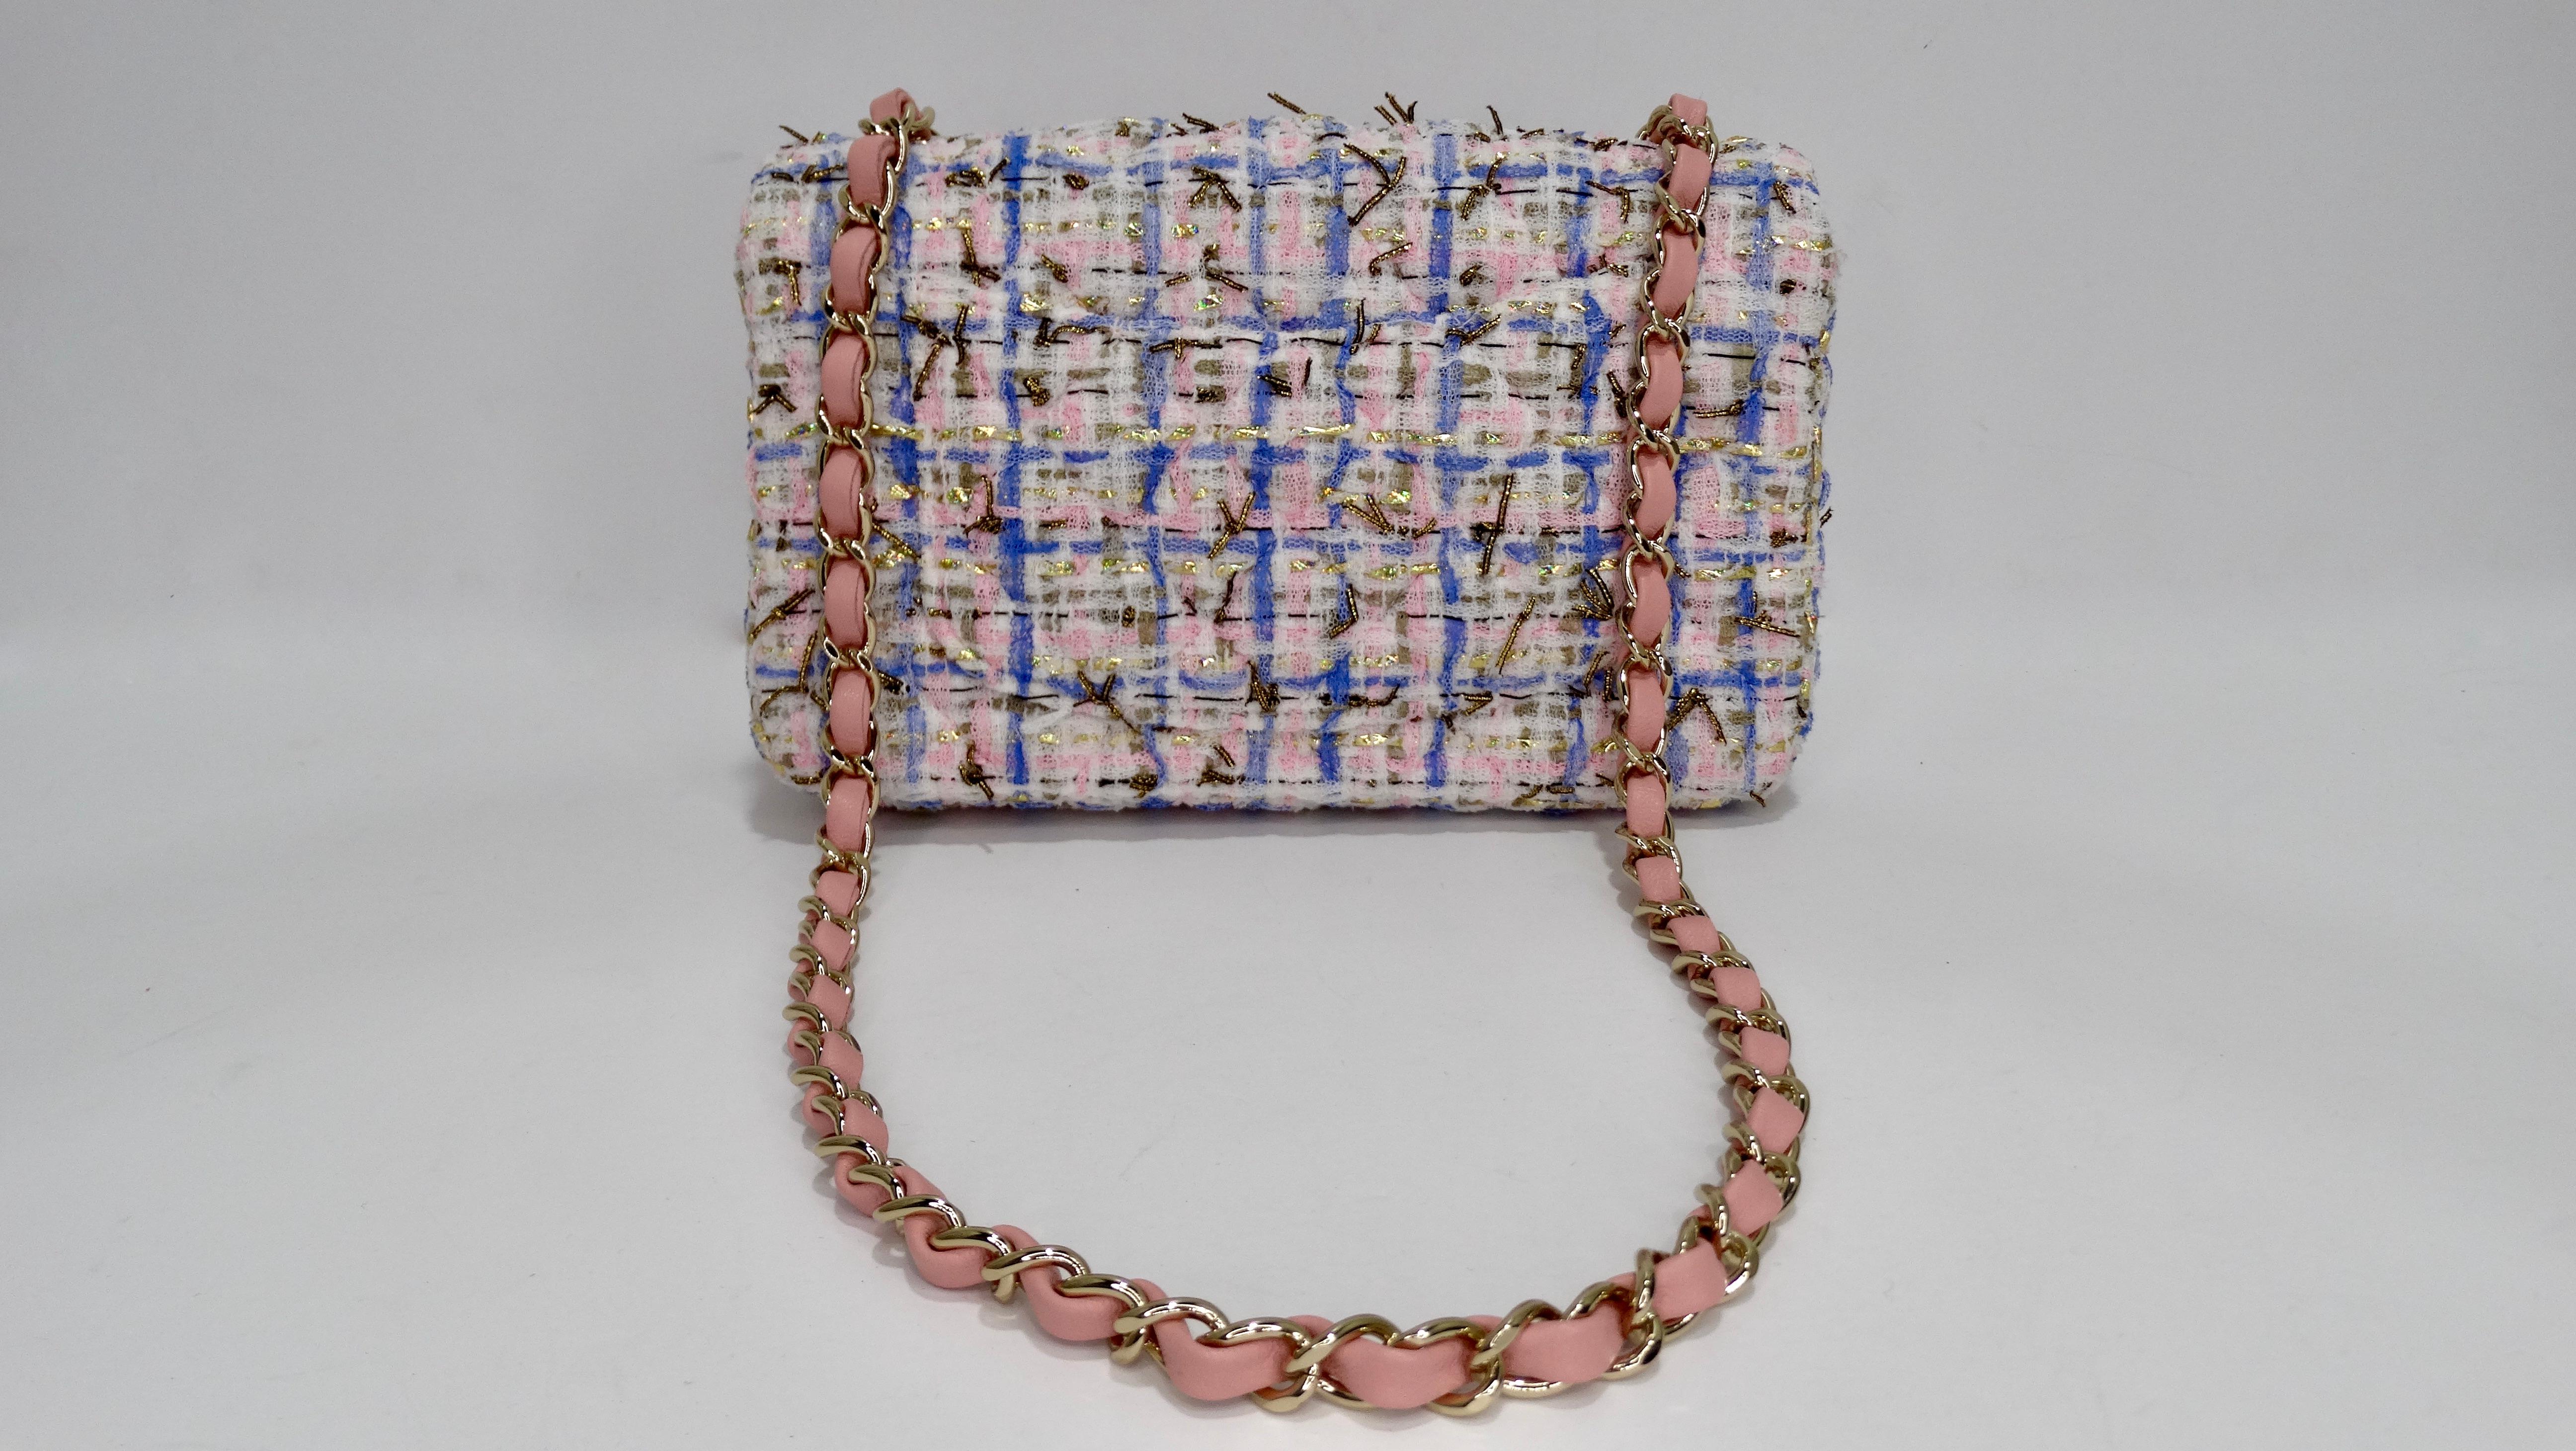 Add this adorable Chanel to your collection! Circa 2019 from their Cruise collection, this chic mini flap bag is crafted from pink, blue, gold and metallic gold tweed fabric with Chanel's signature quilted stitching. The bag features light gold